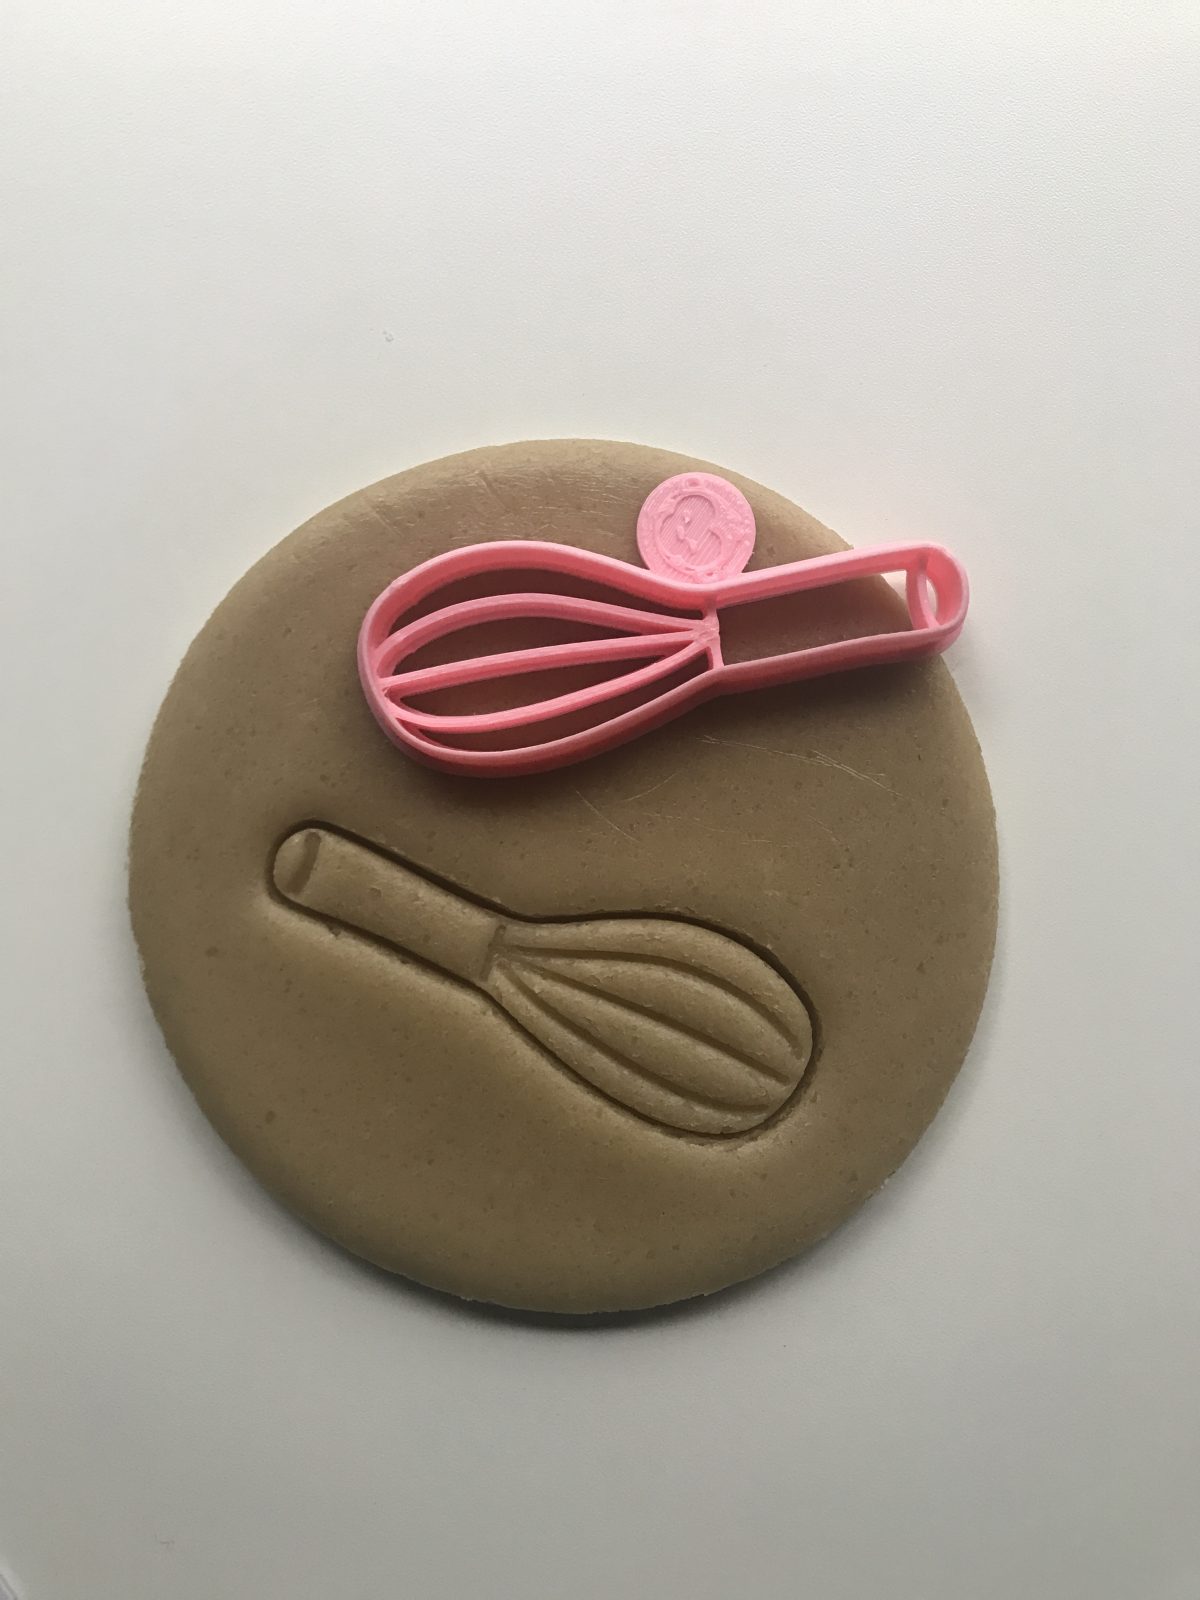 Whisk Cookie Cutter